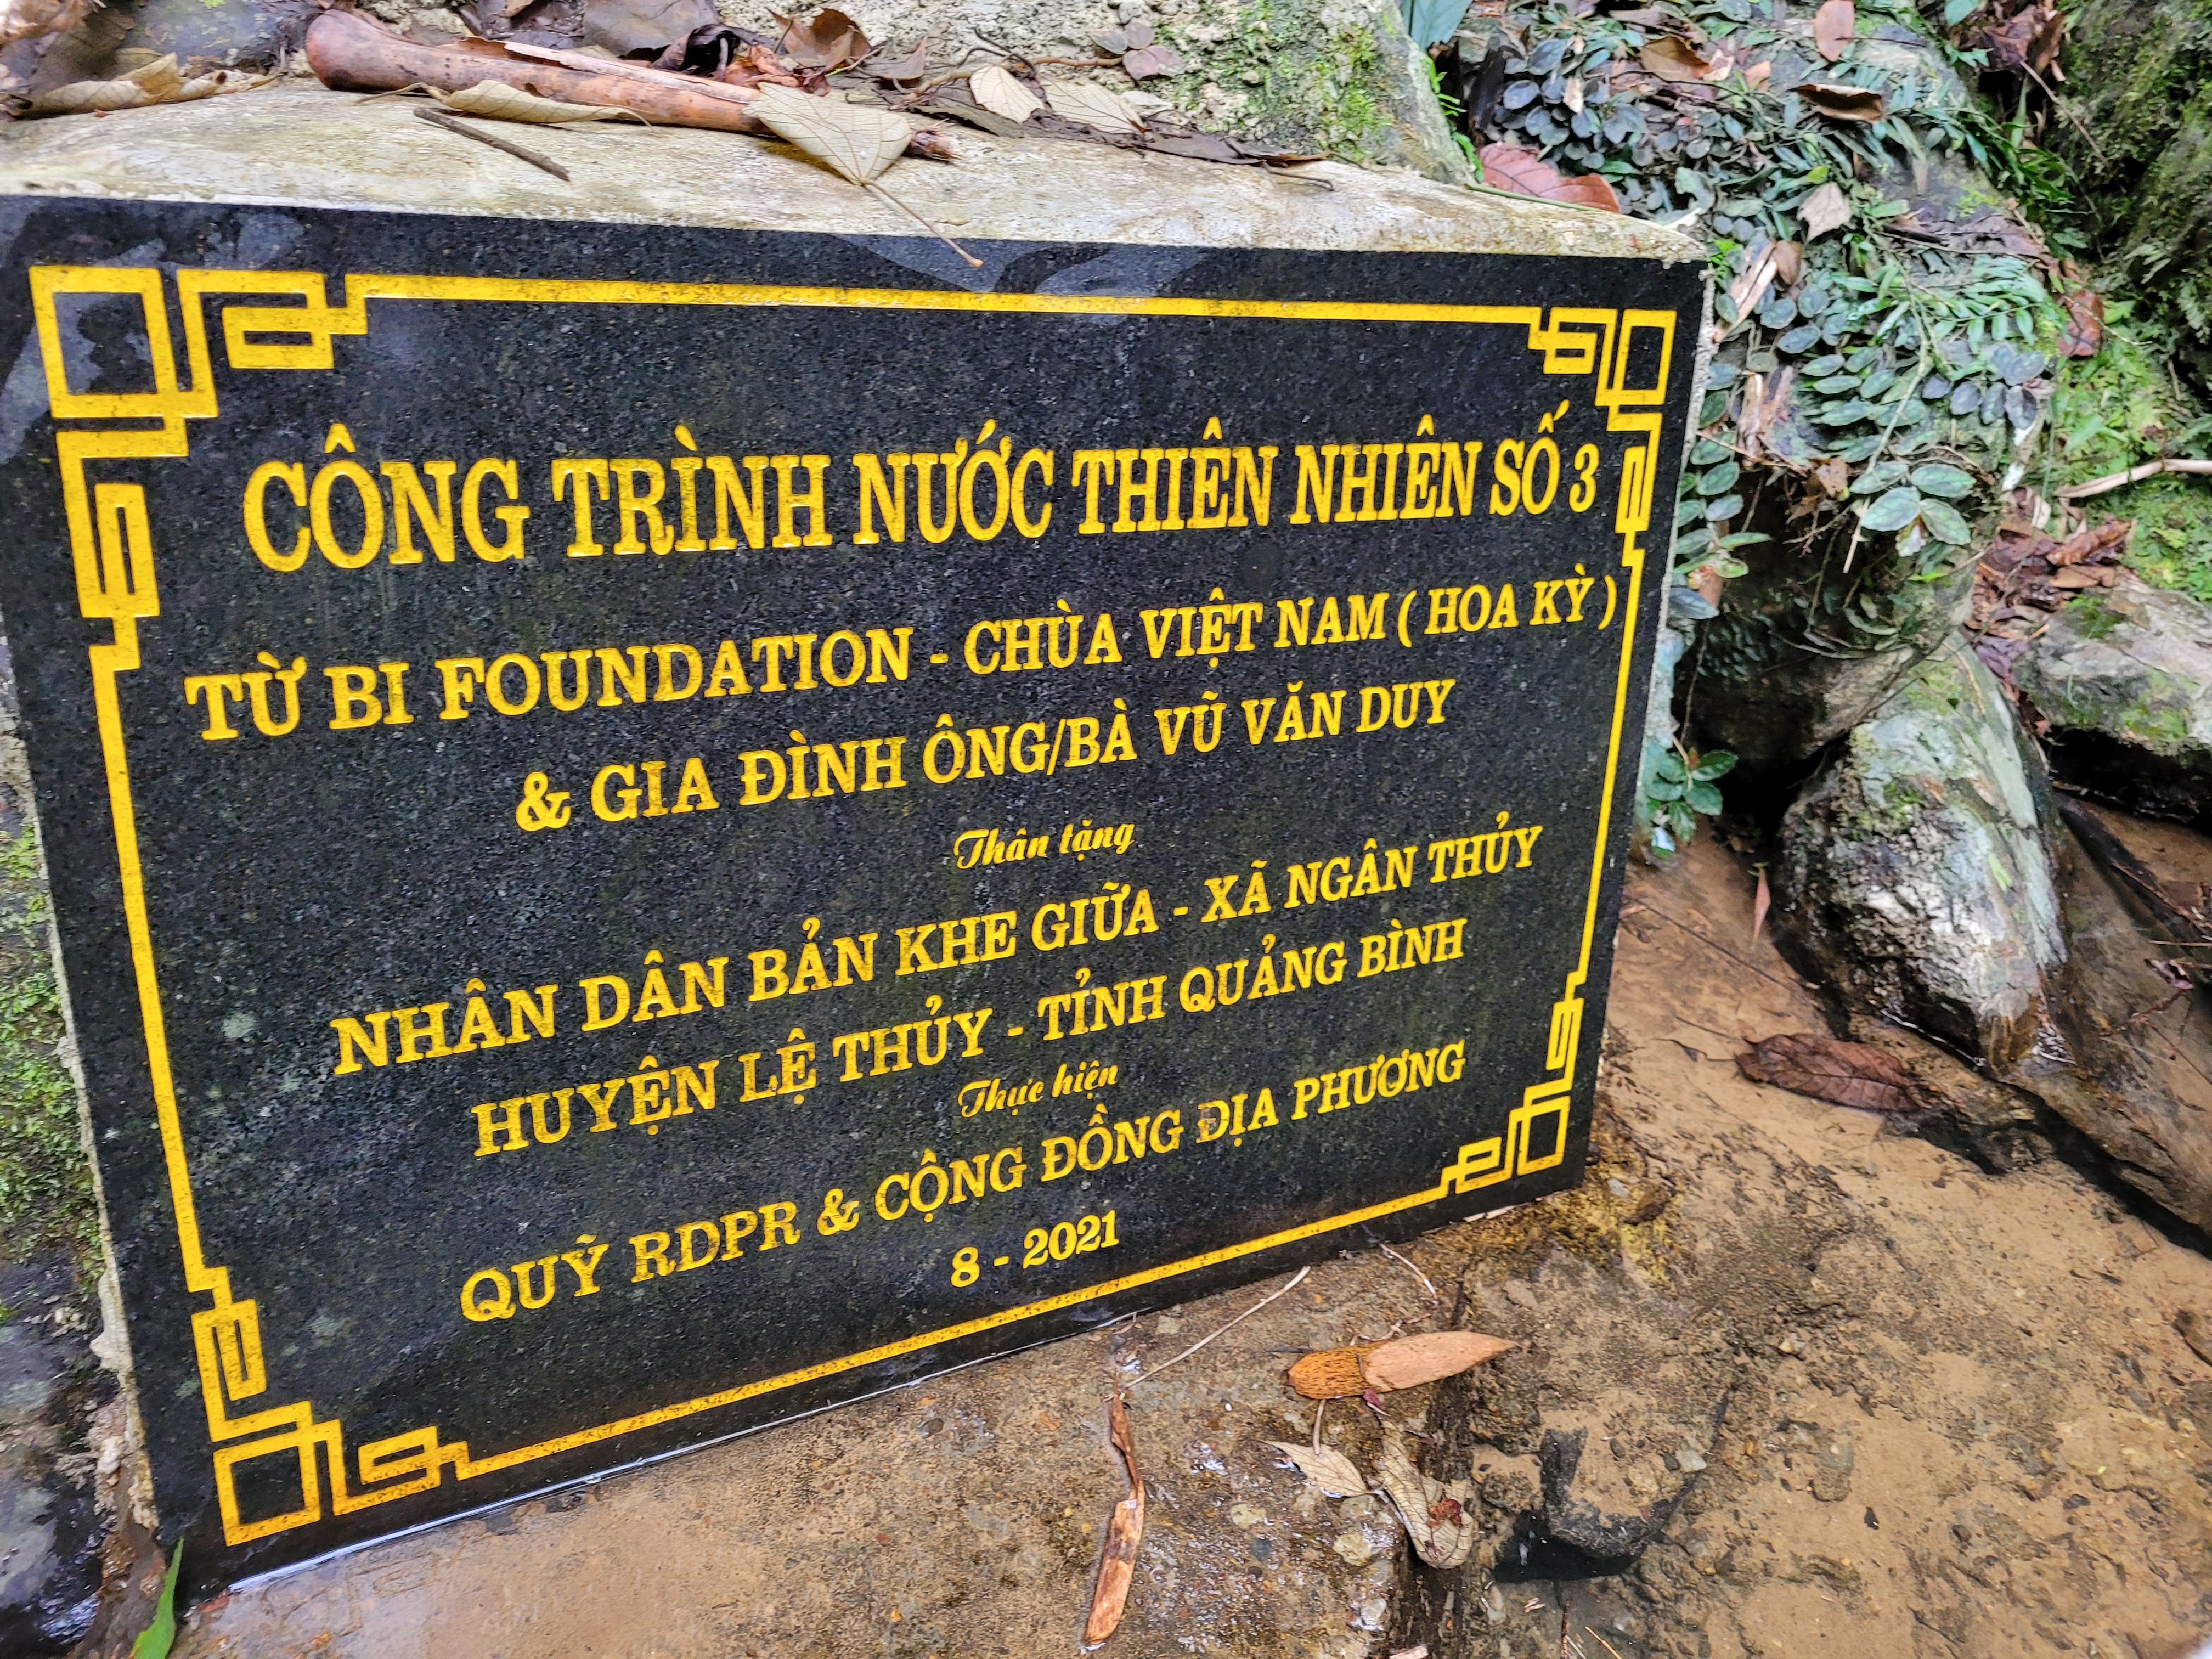 Gieng-nuoc-thien-nhien-so-3-45